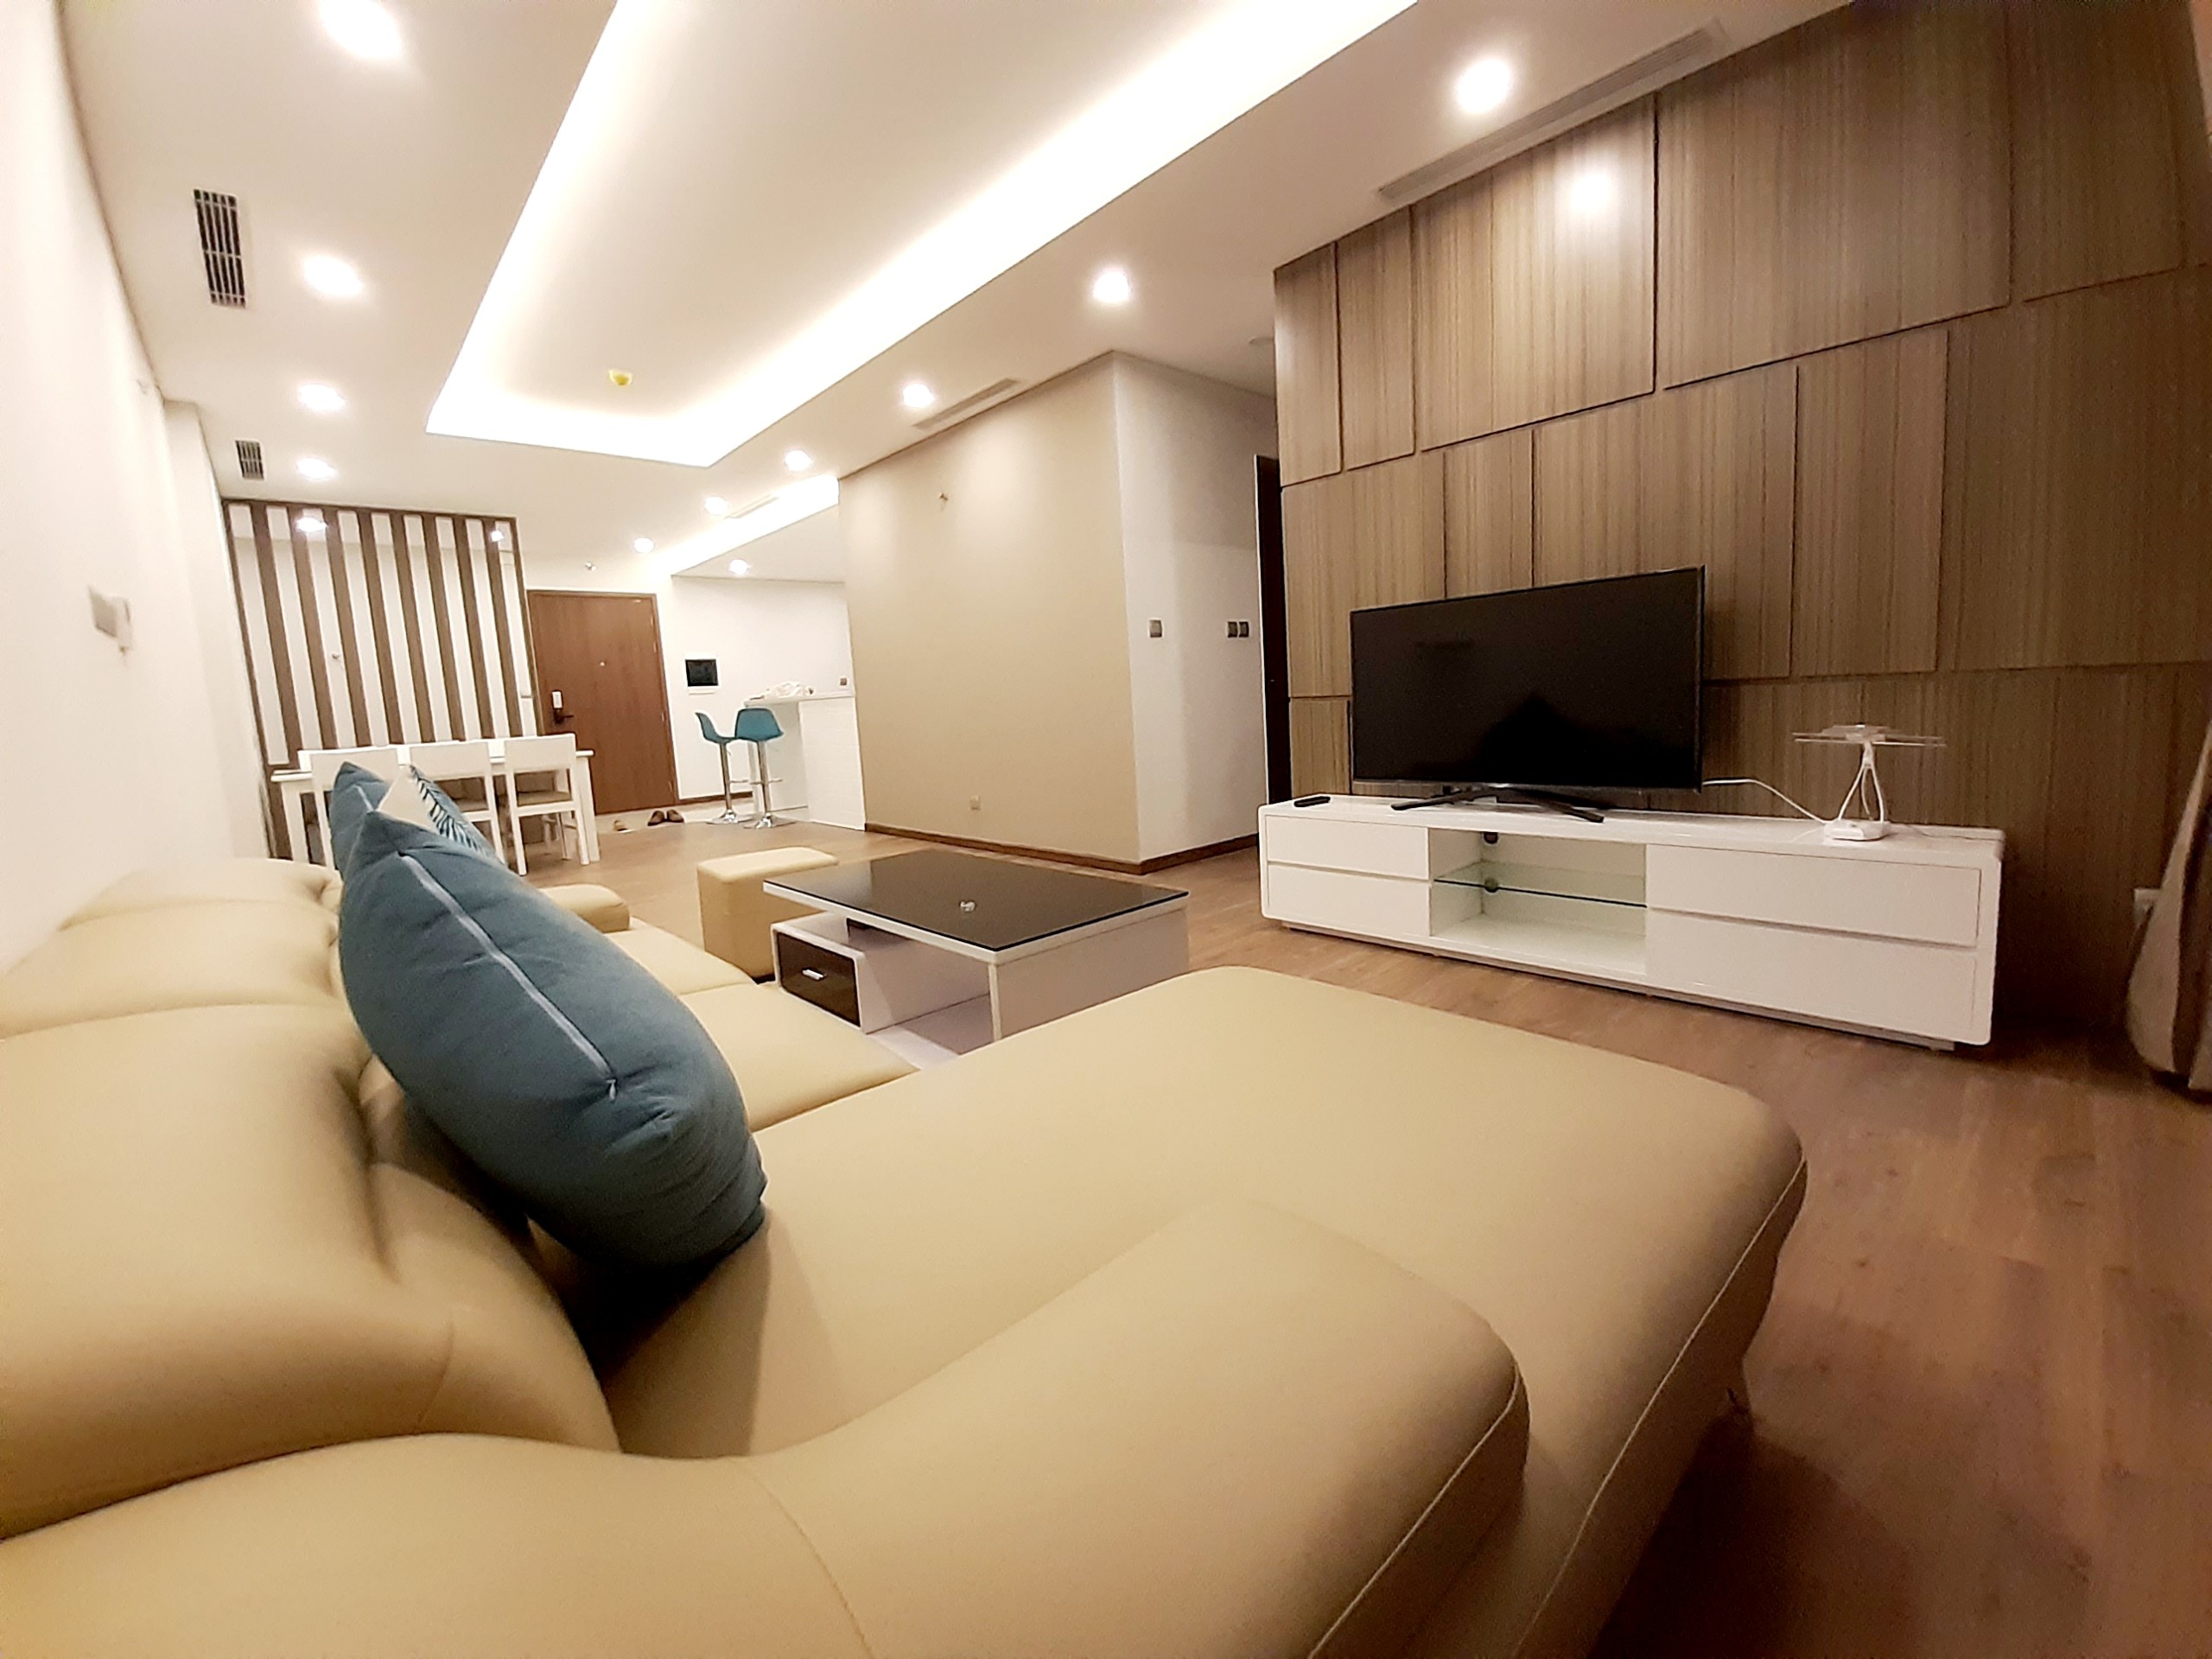 $850 | 3BEDS | 2BATHS apartment with UNIQUE RENOVATED kitchen for rent in N01T4, Ngoai Giao Doan